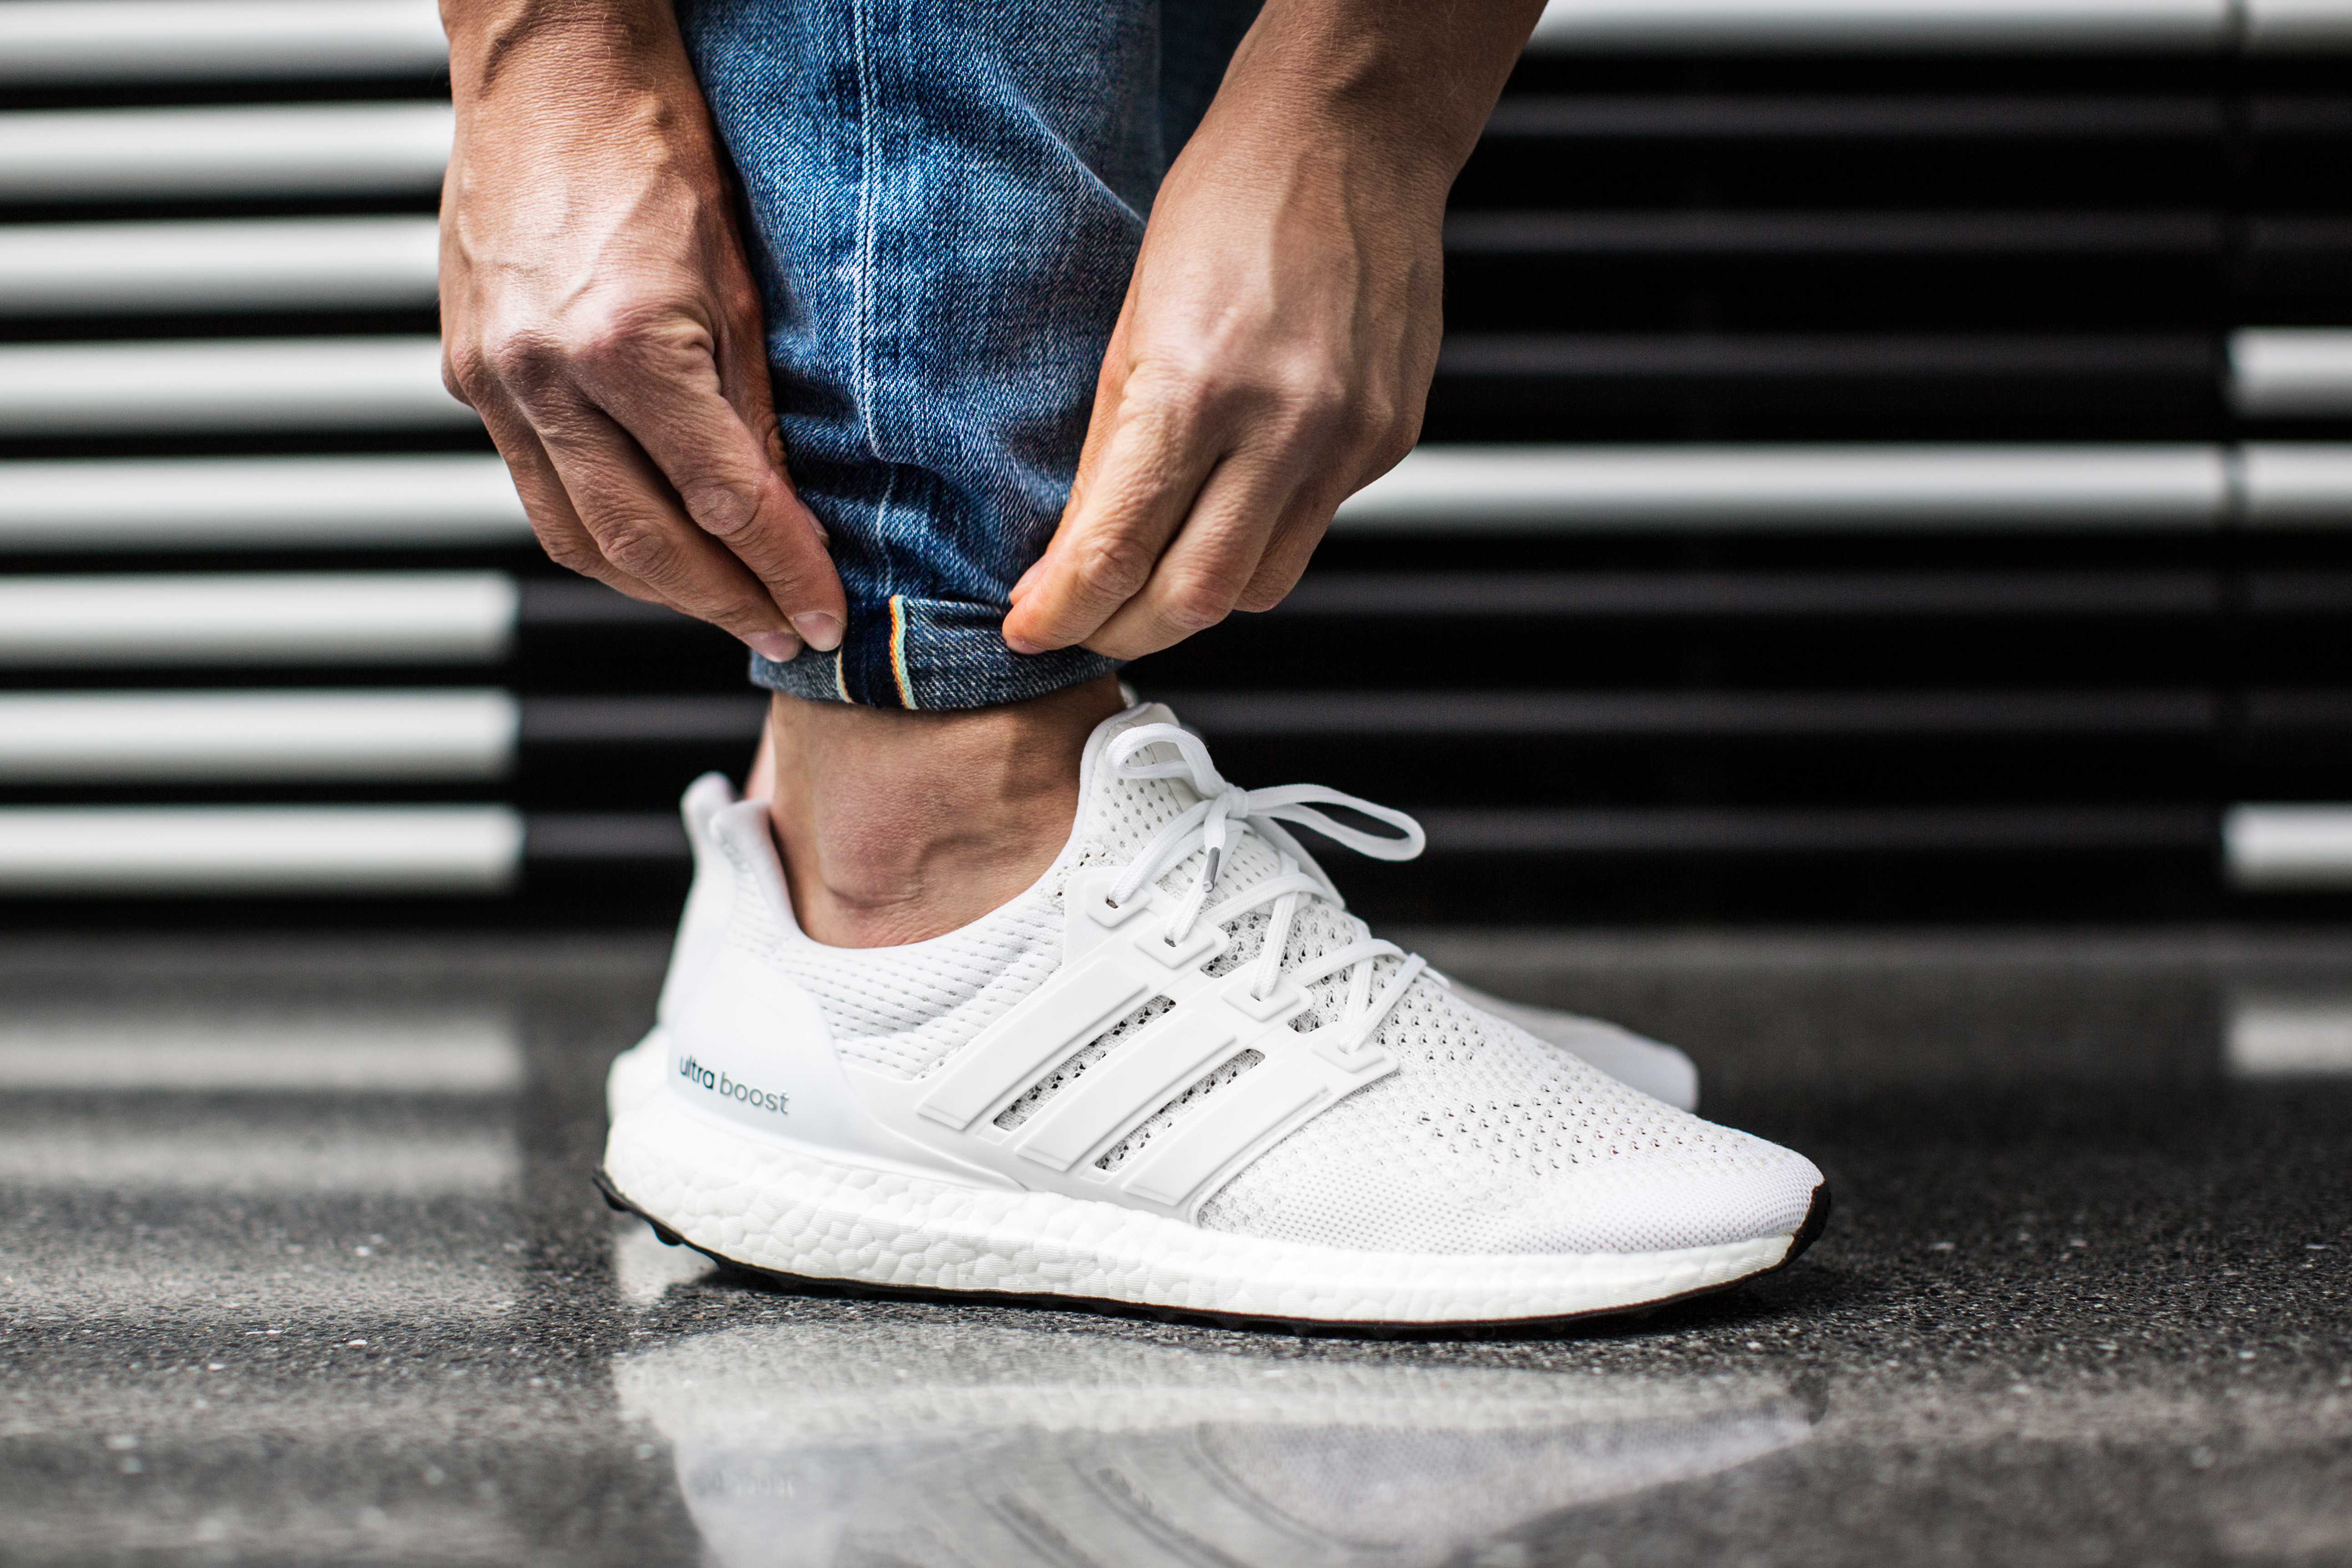 Cleaning of triple white ultra boost YouTube